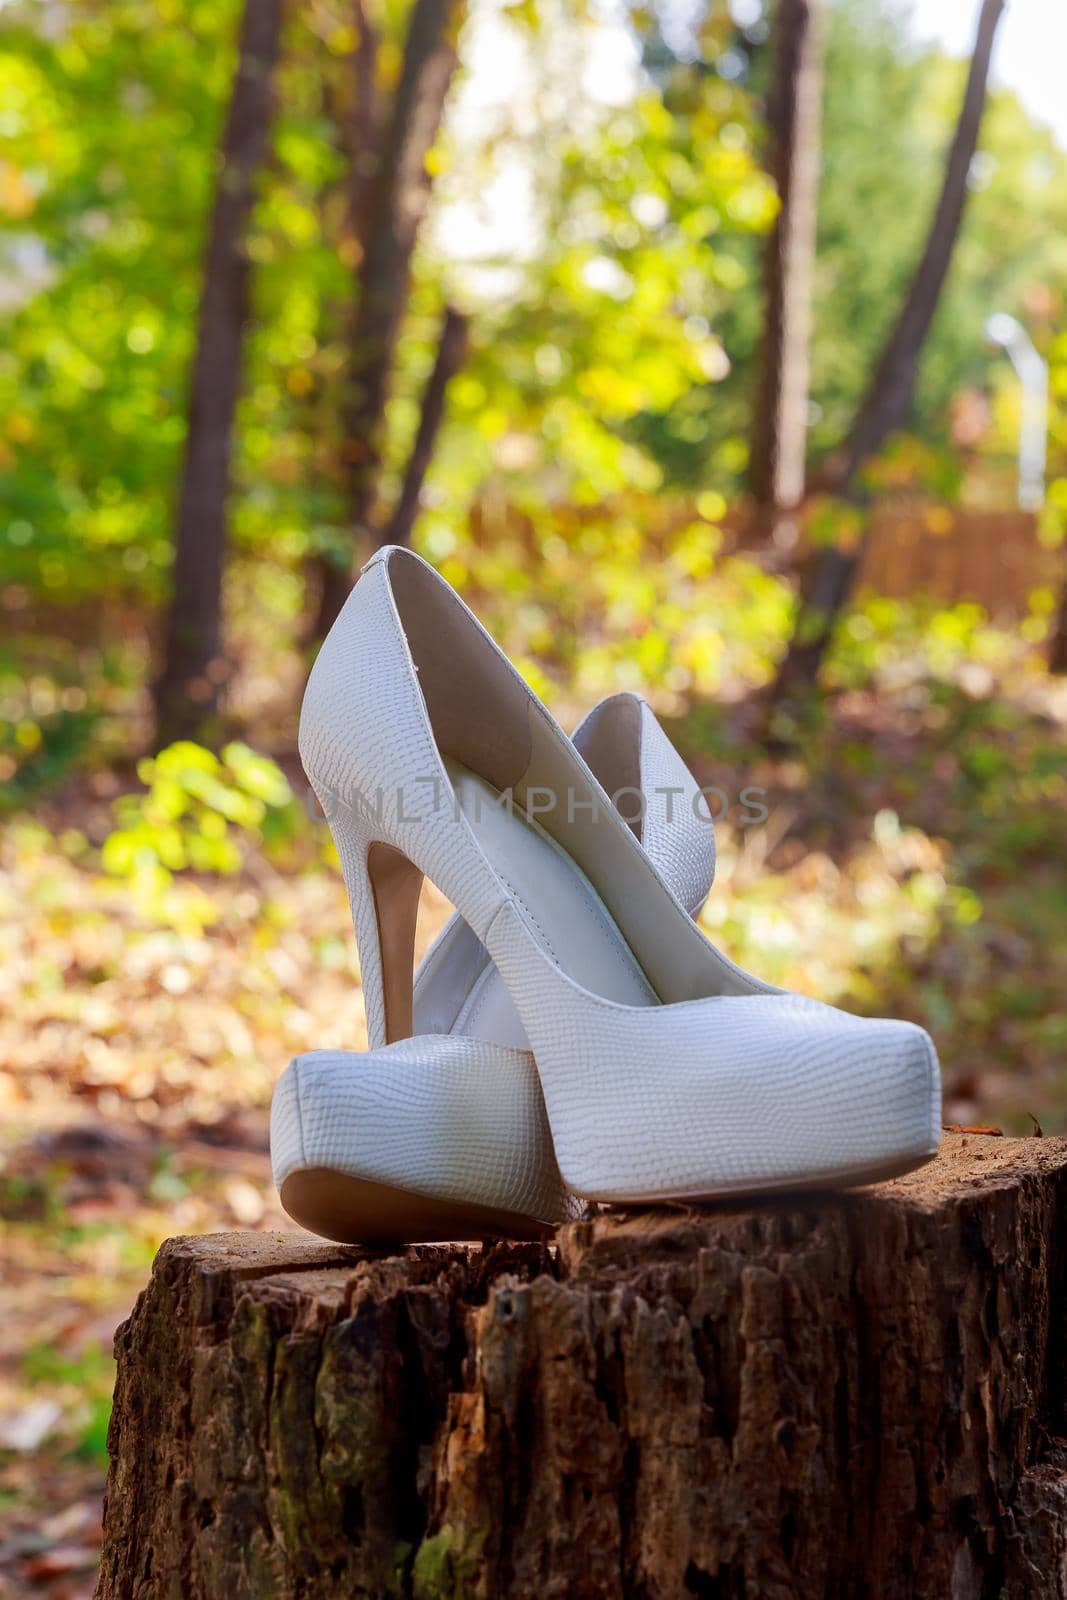 The beautiful shoes of the bride with flowers on the side. by ungvar